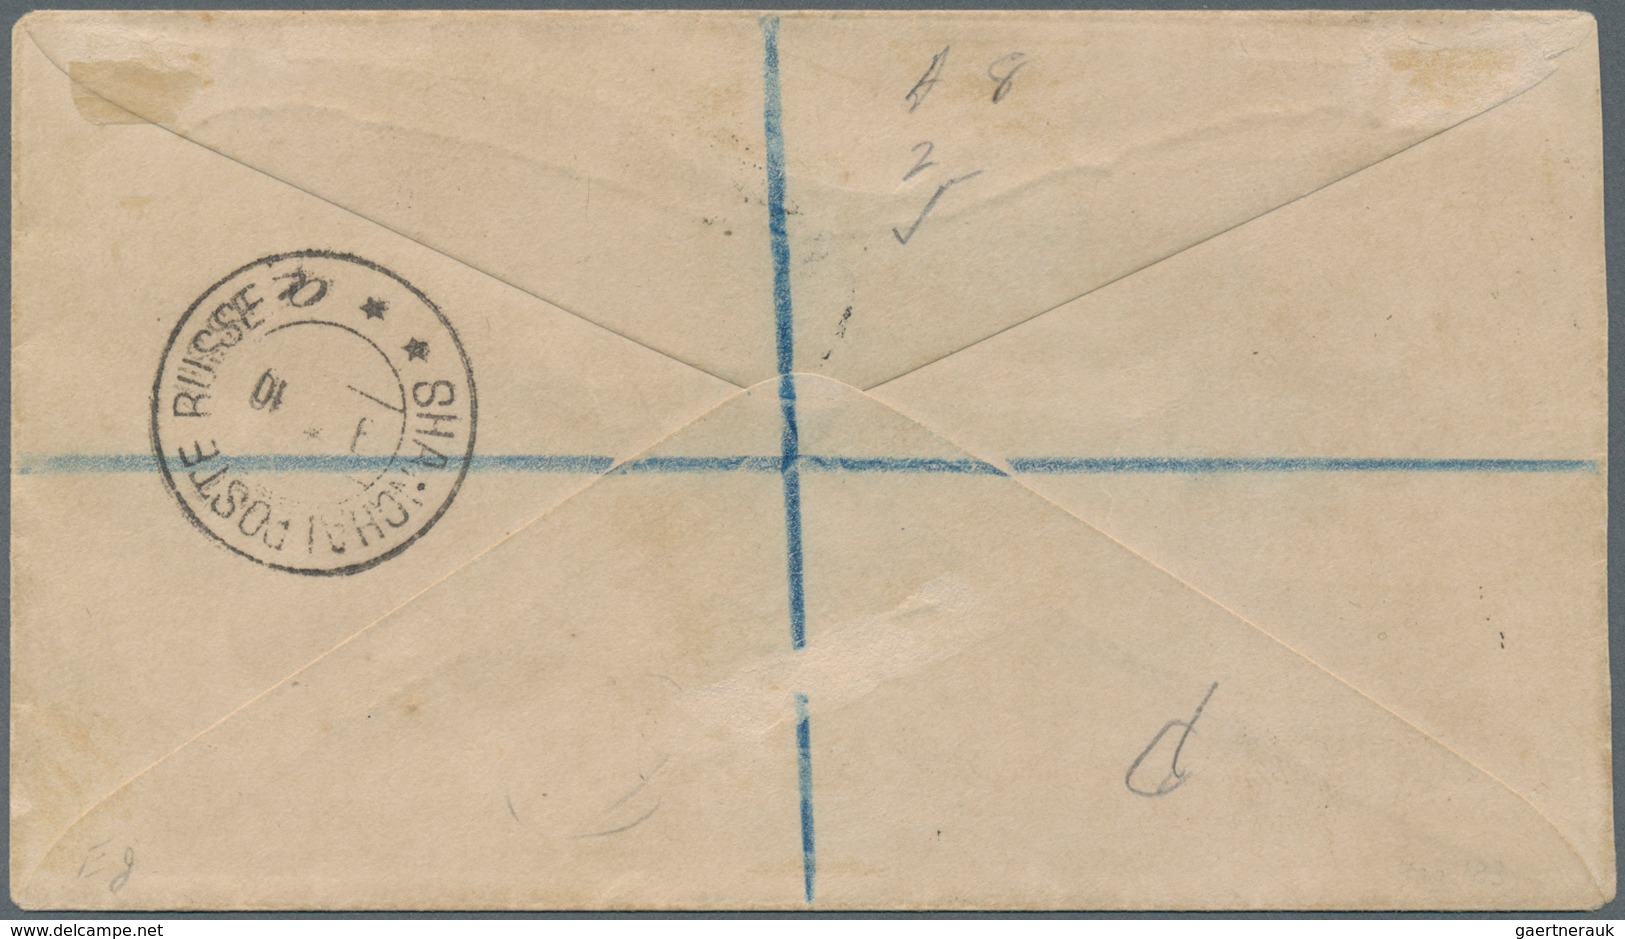 Russische Post In China: 1910 Registered Cover With 30 Cop. Franking (1x2 Kop. + Block Of Four From - China